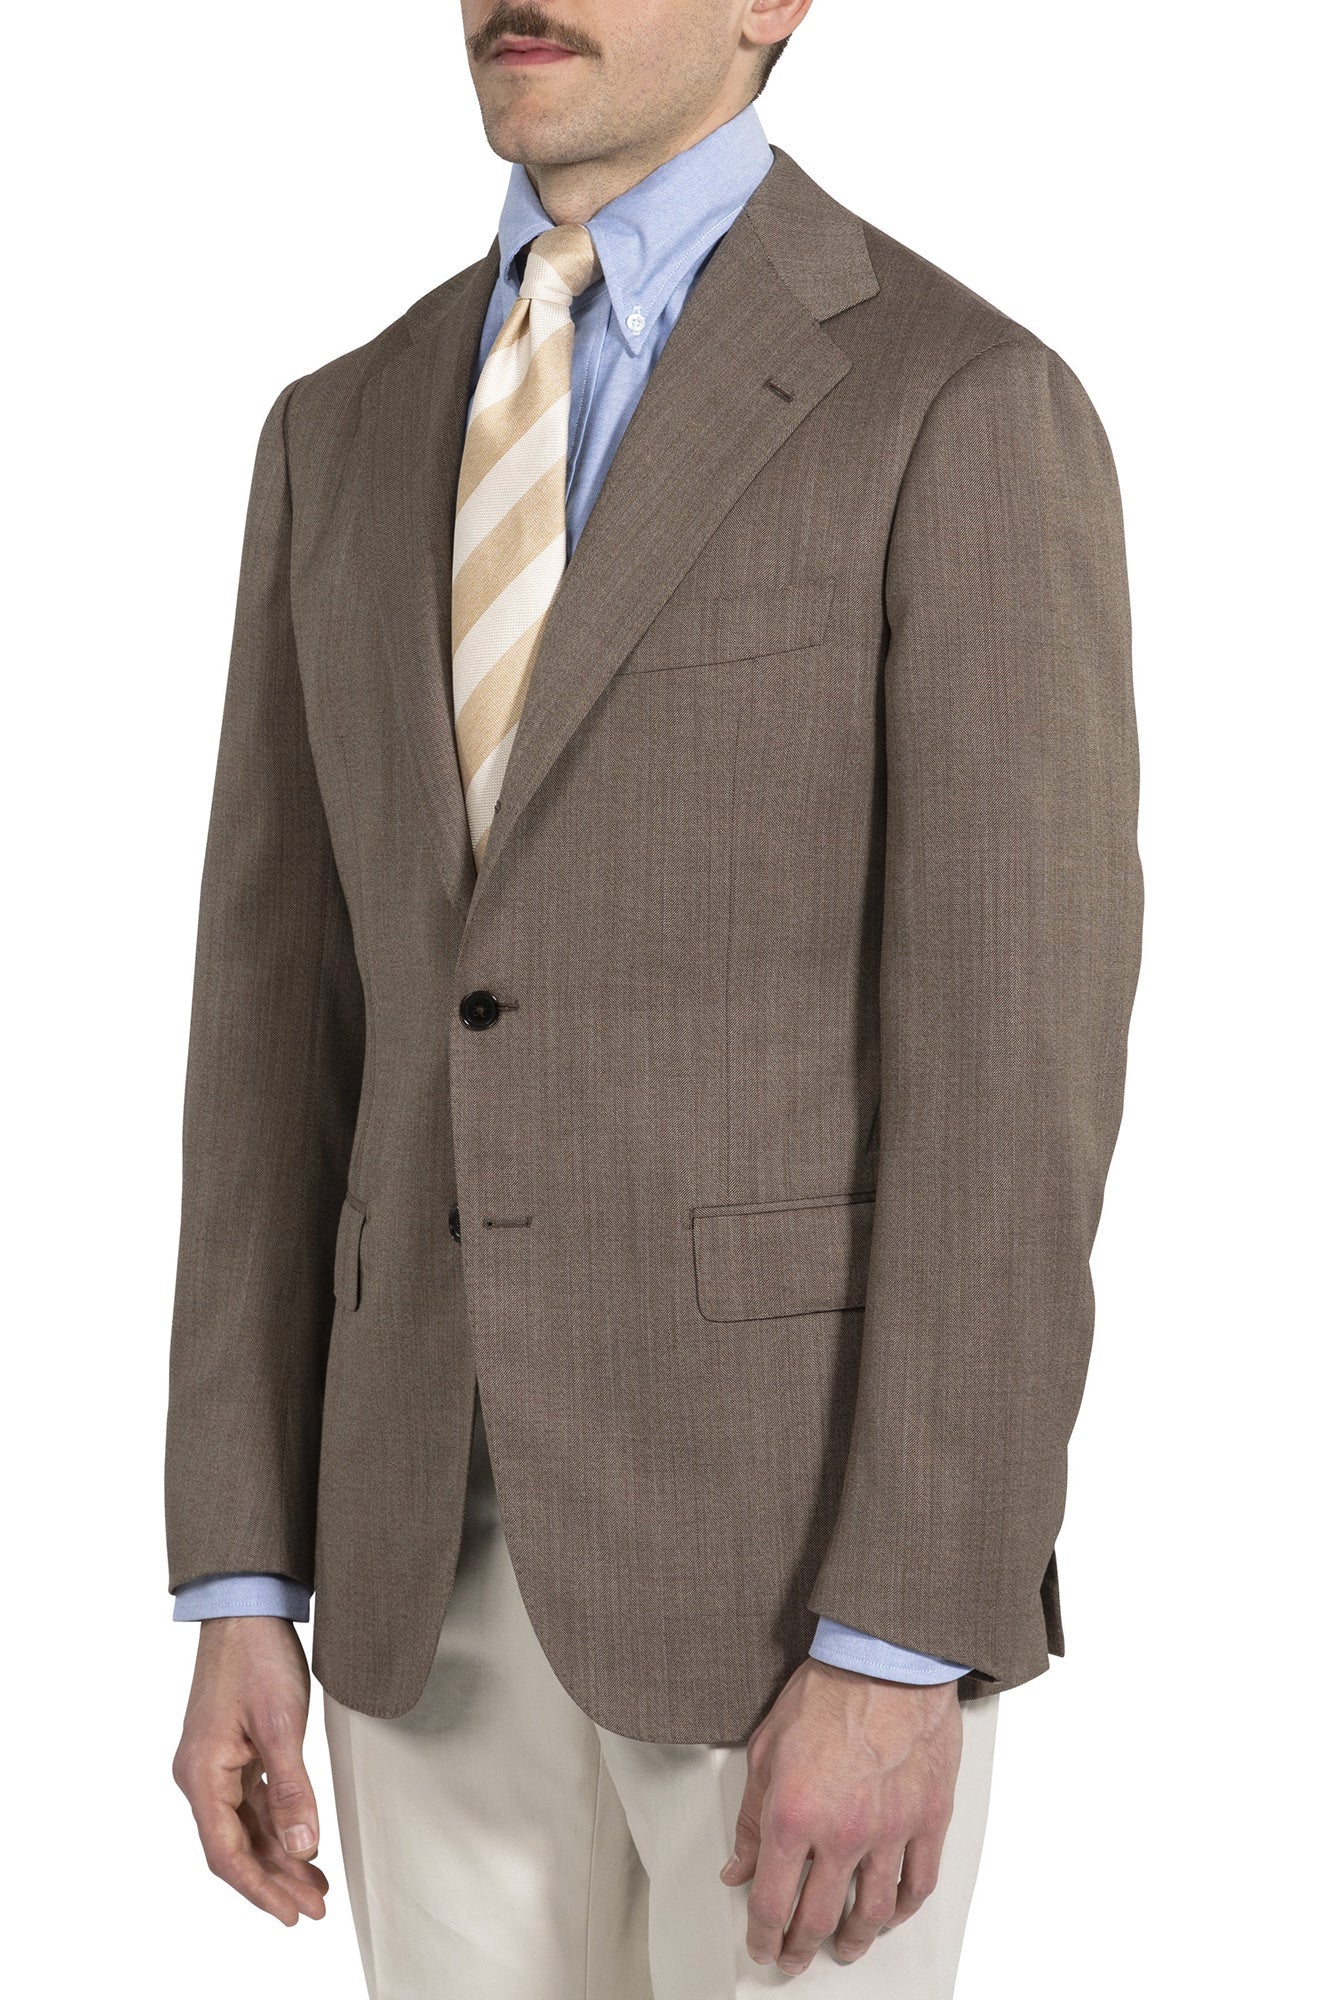 The Armoury by Ring Jacket Model 3 Mid Brown Wool Herringbone Sport Coat with Flap Pocket